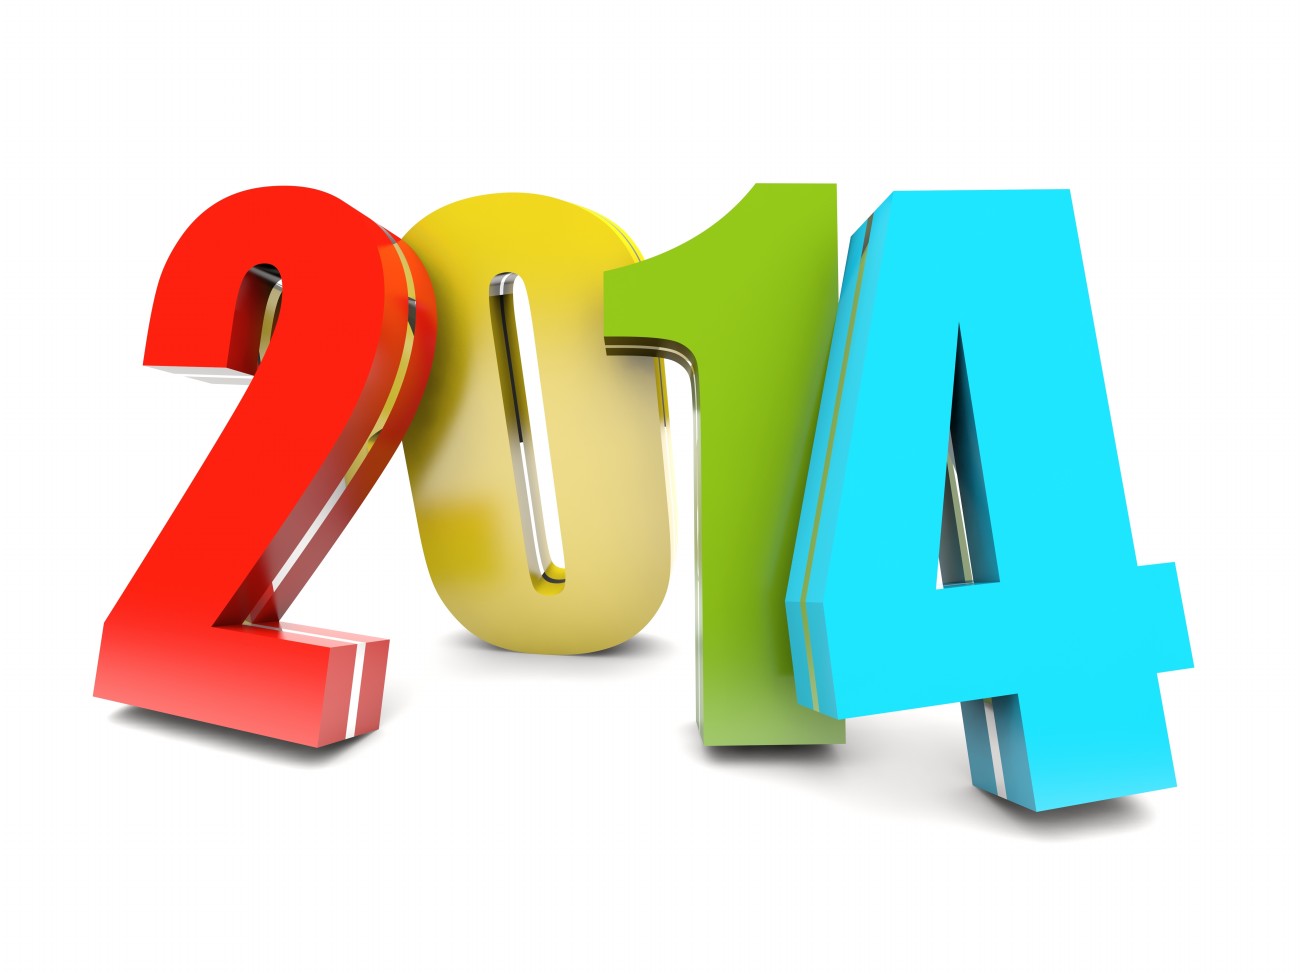 2014 Numbers   Happy 2014 New Year Images Wallpapers   Elsoar